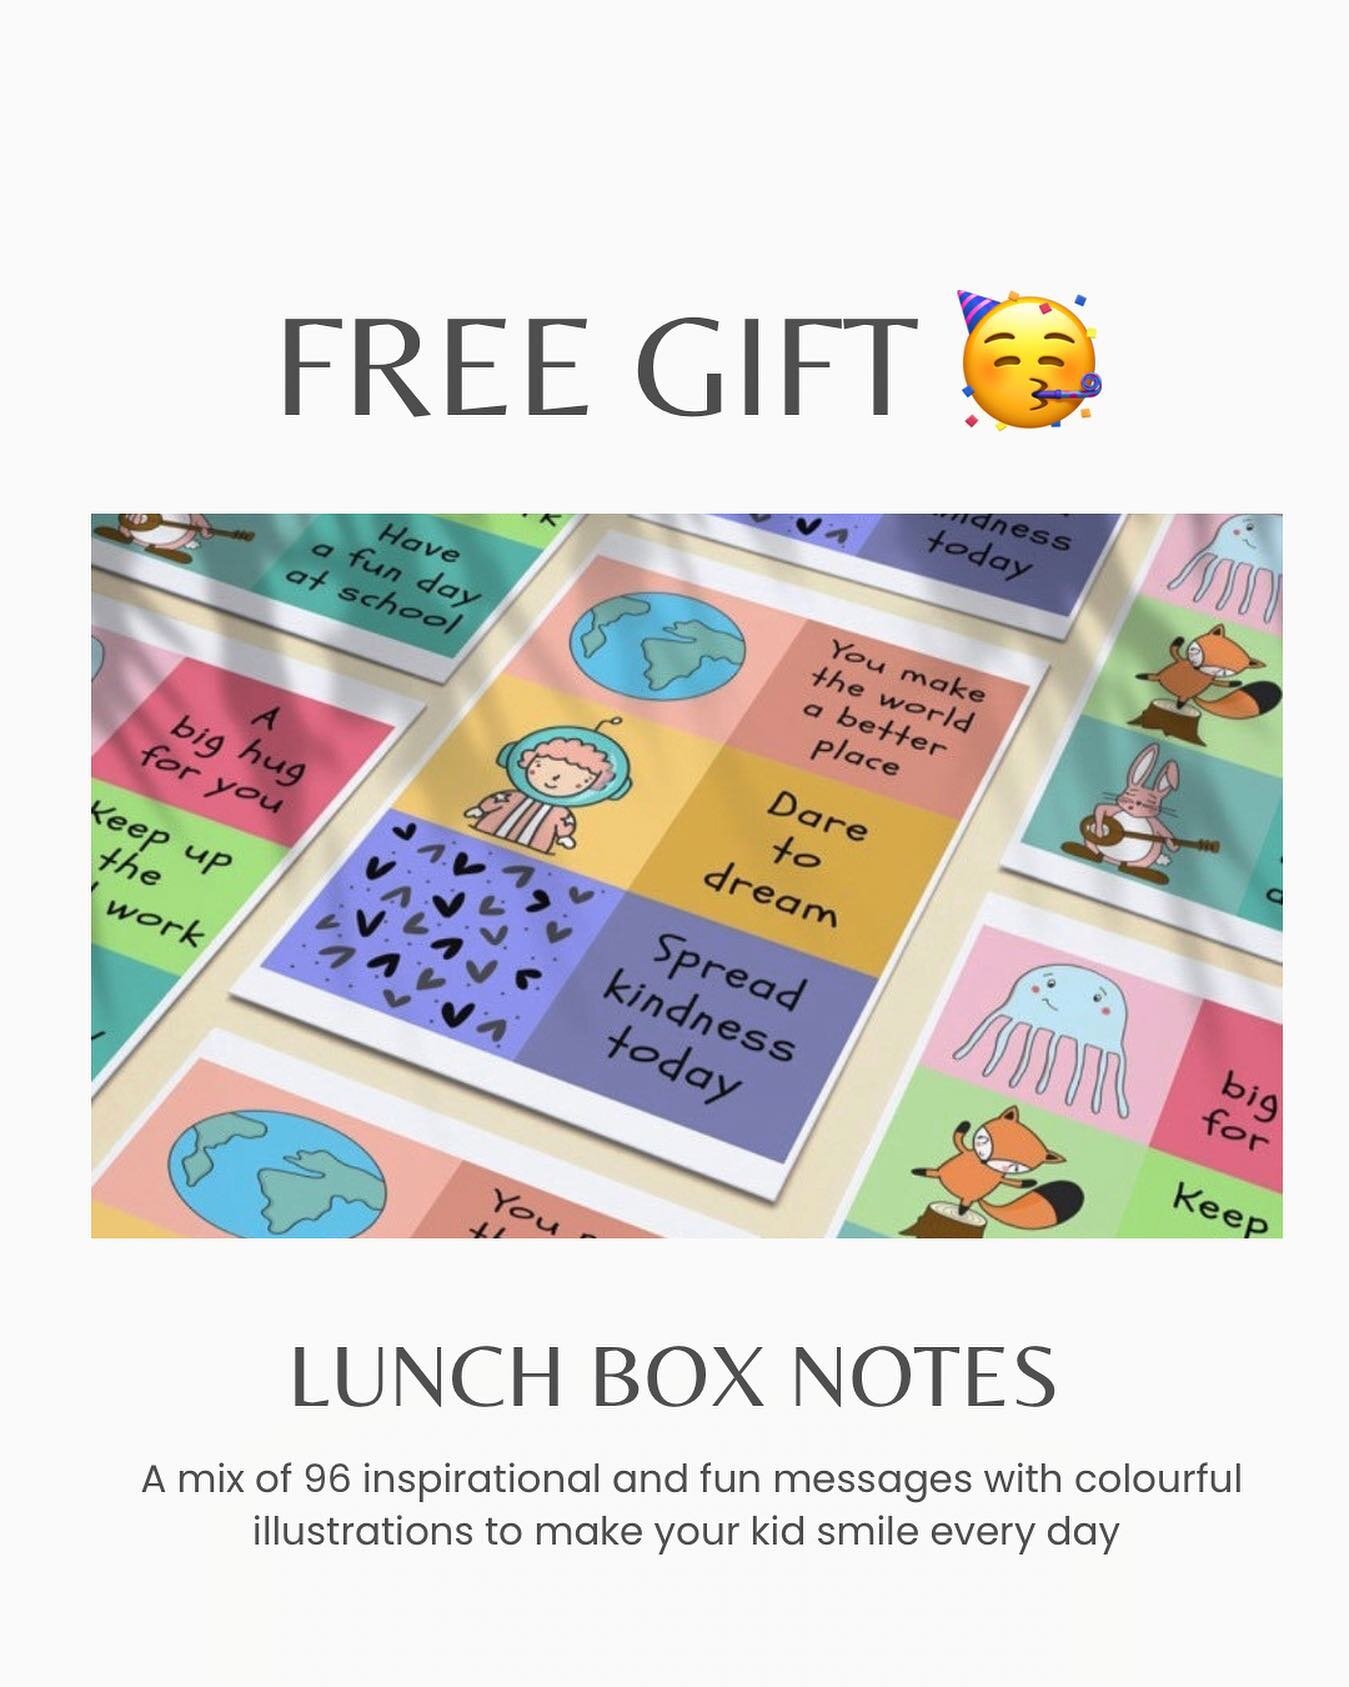 Here is your back-to-school gift from Monkinya ❤️🥳 Follow @monkinya - Comment below with an emoji that best describes &ldquo;back to school&rdquo; for you, and you&rsquo;ll get a DM to download Monkinya&rsquo;s fun lunch box printables. 
Feel free t